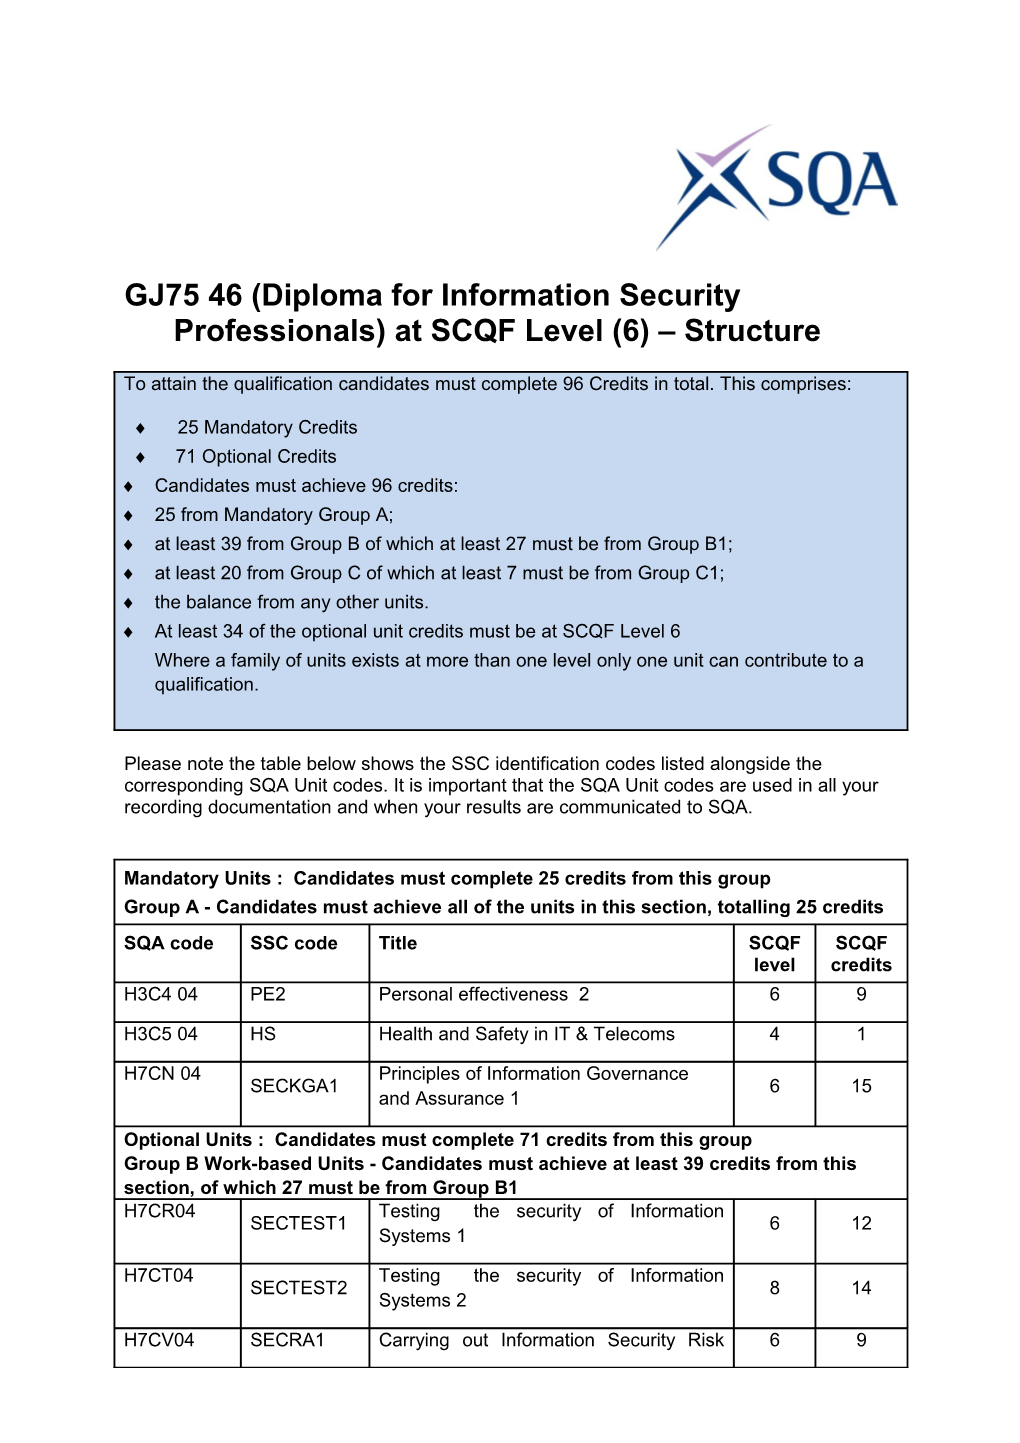 GJ75 46(Diploma for Information Security Professionals) at SCQF Level (6) Structure